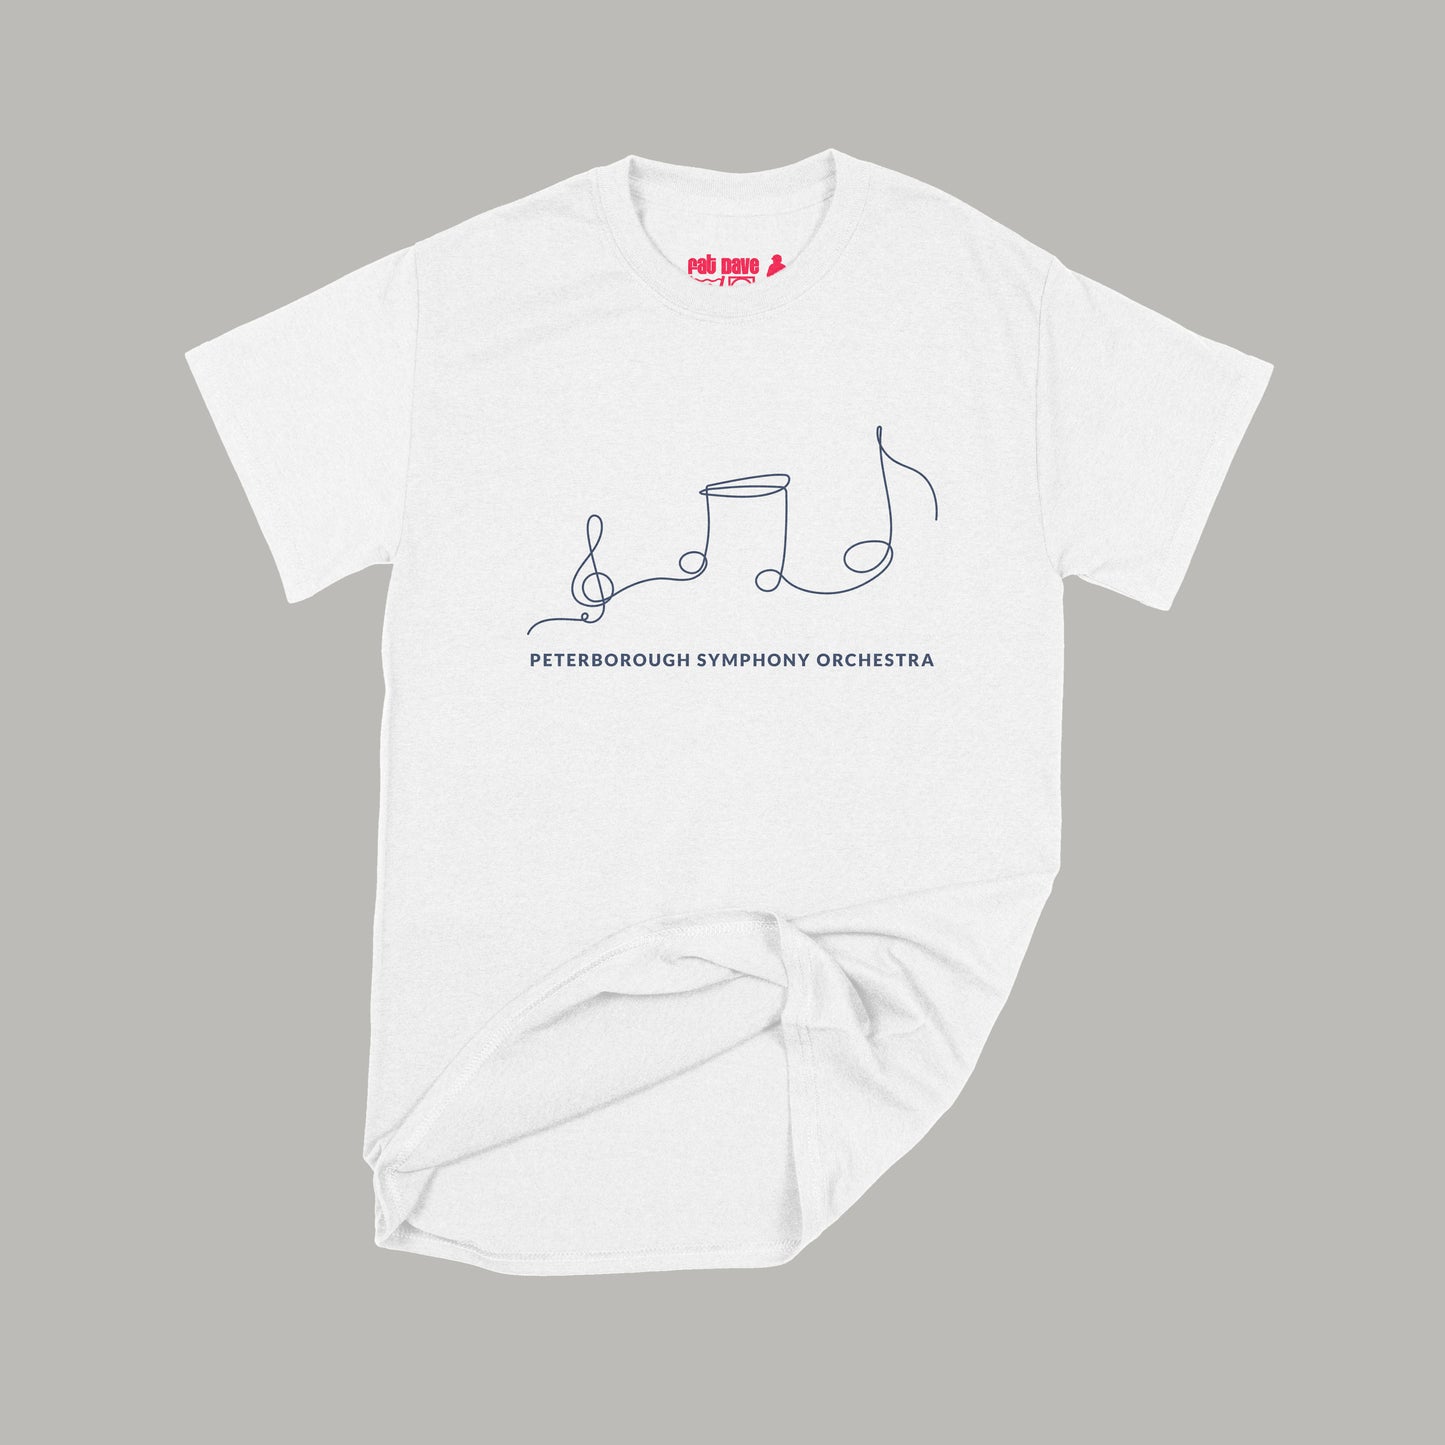 Brantford, Fat Dave, Musician, Notes, Peterborough Symphony Orchestra, T-Shirt, White